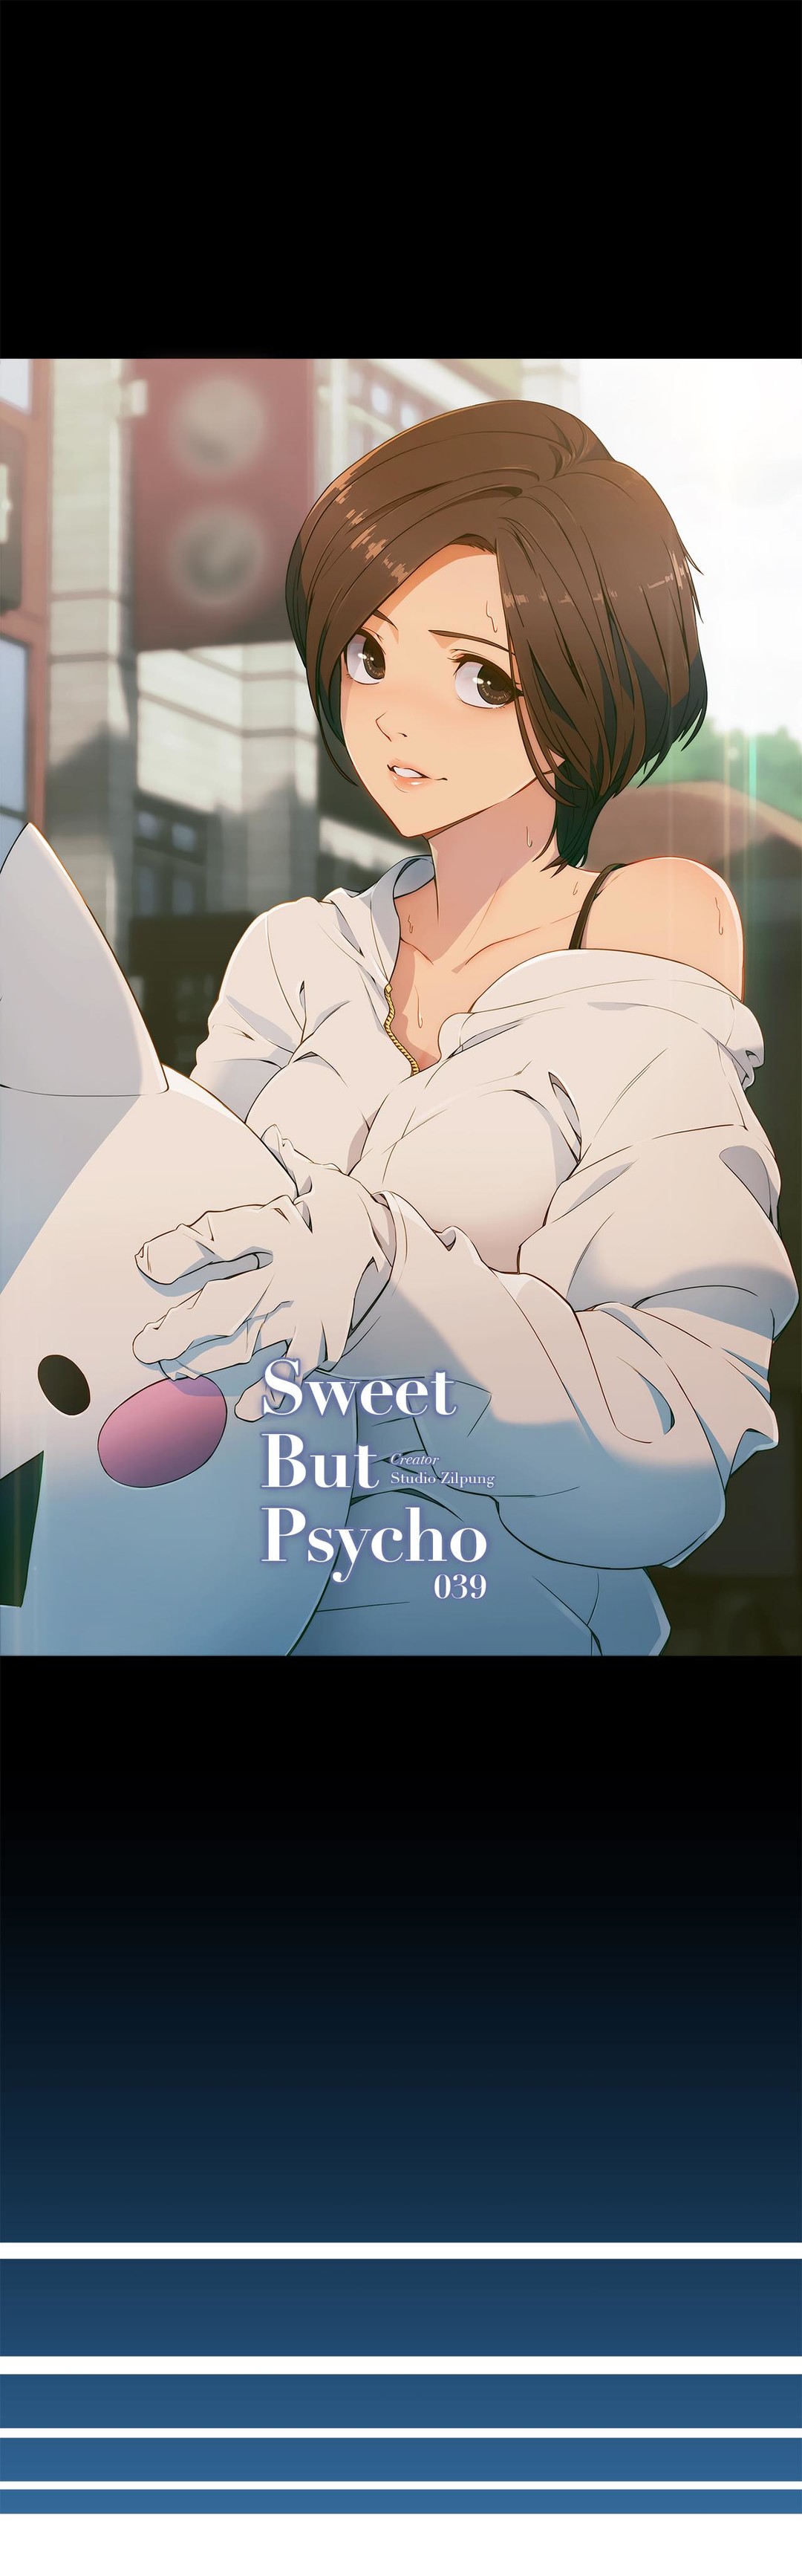 Sweet but Psycho image